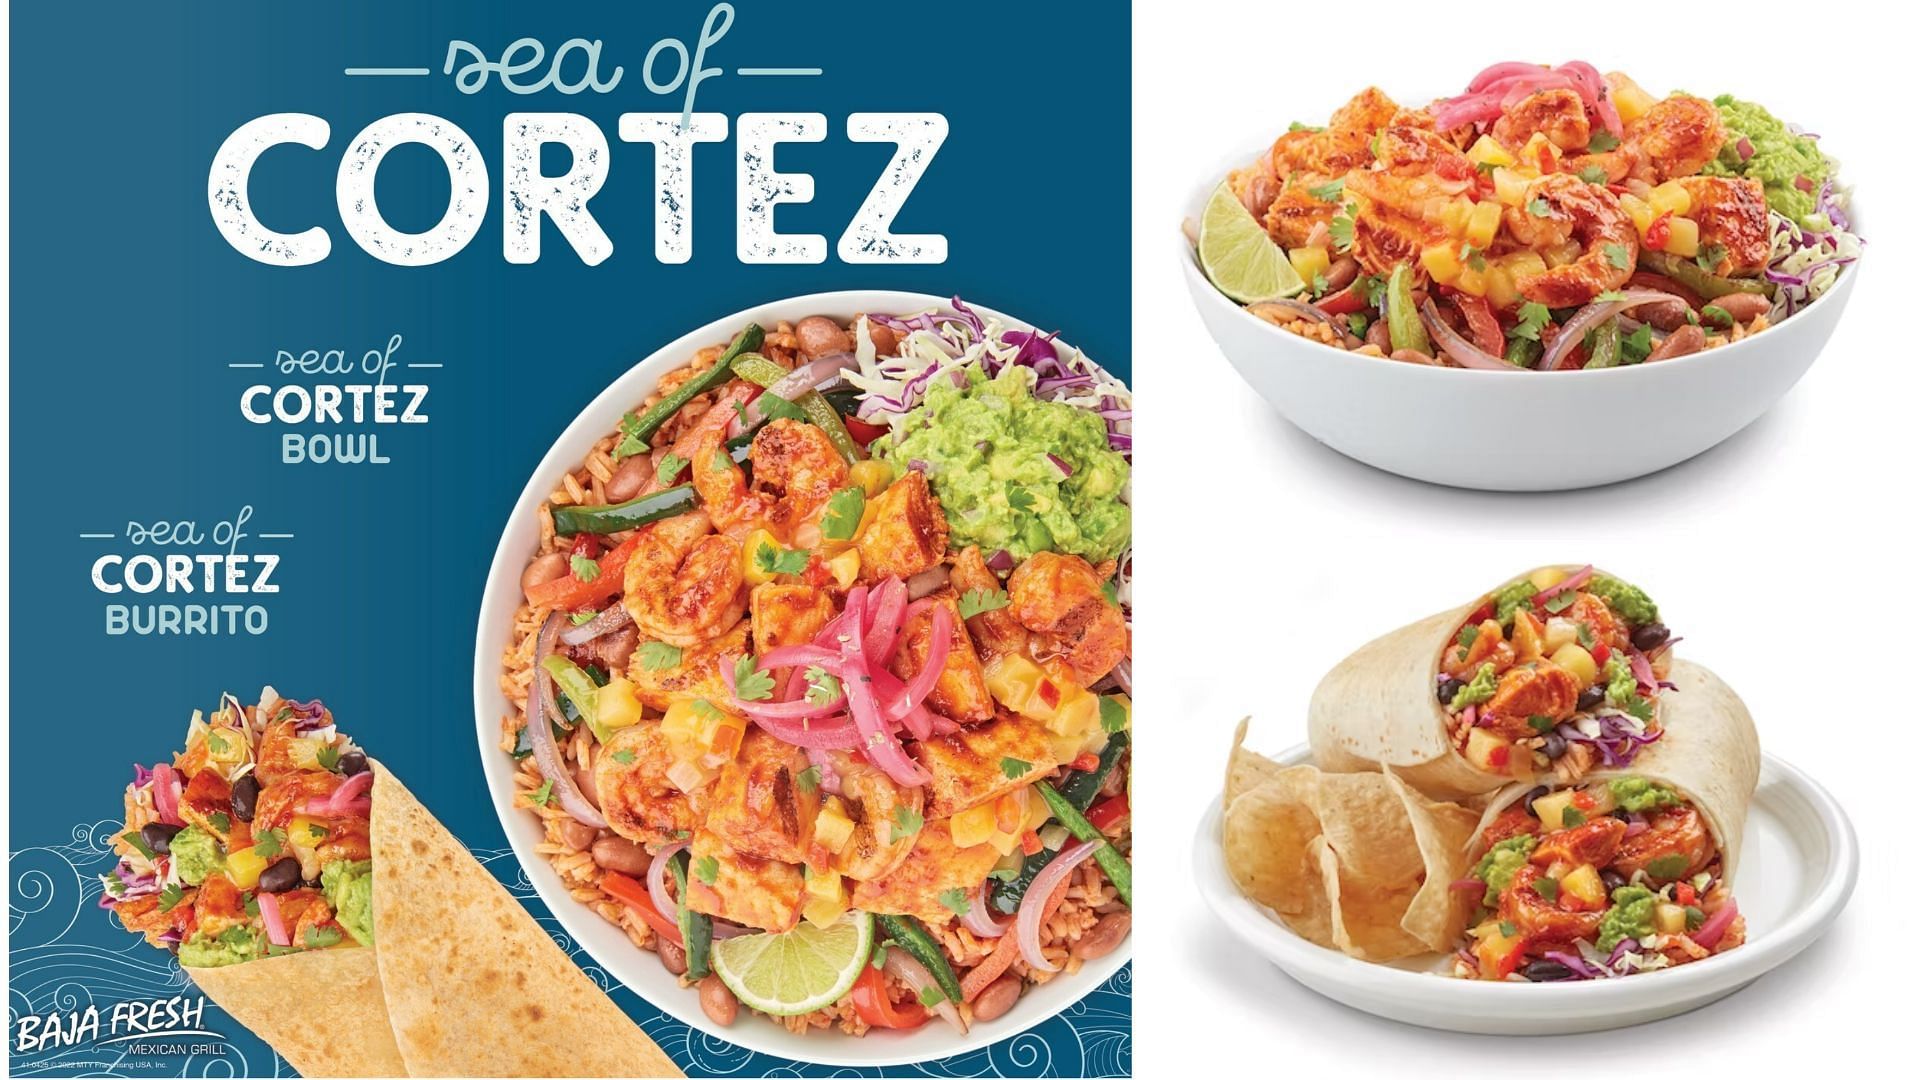 the Sea of Cortez Bowl and Burrito offer hearty meals at the suggested price of $13.99 (Image via Baja Fresh)